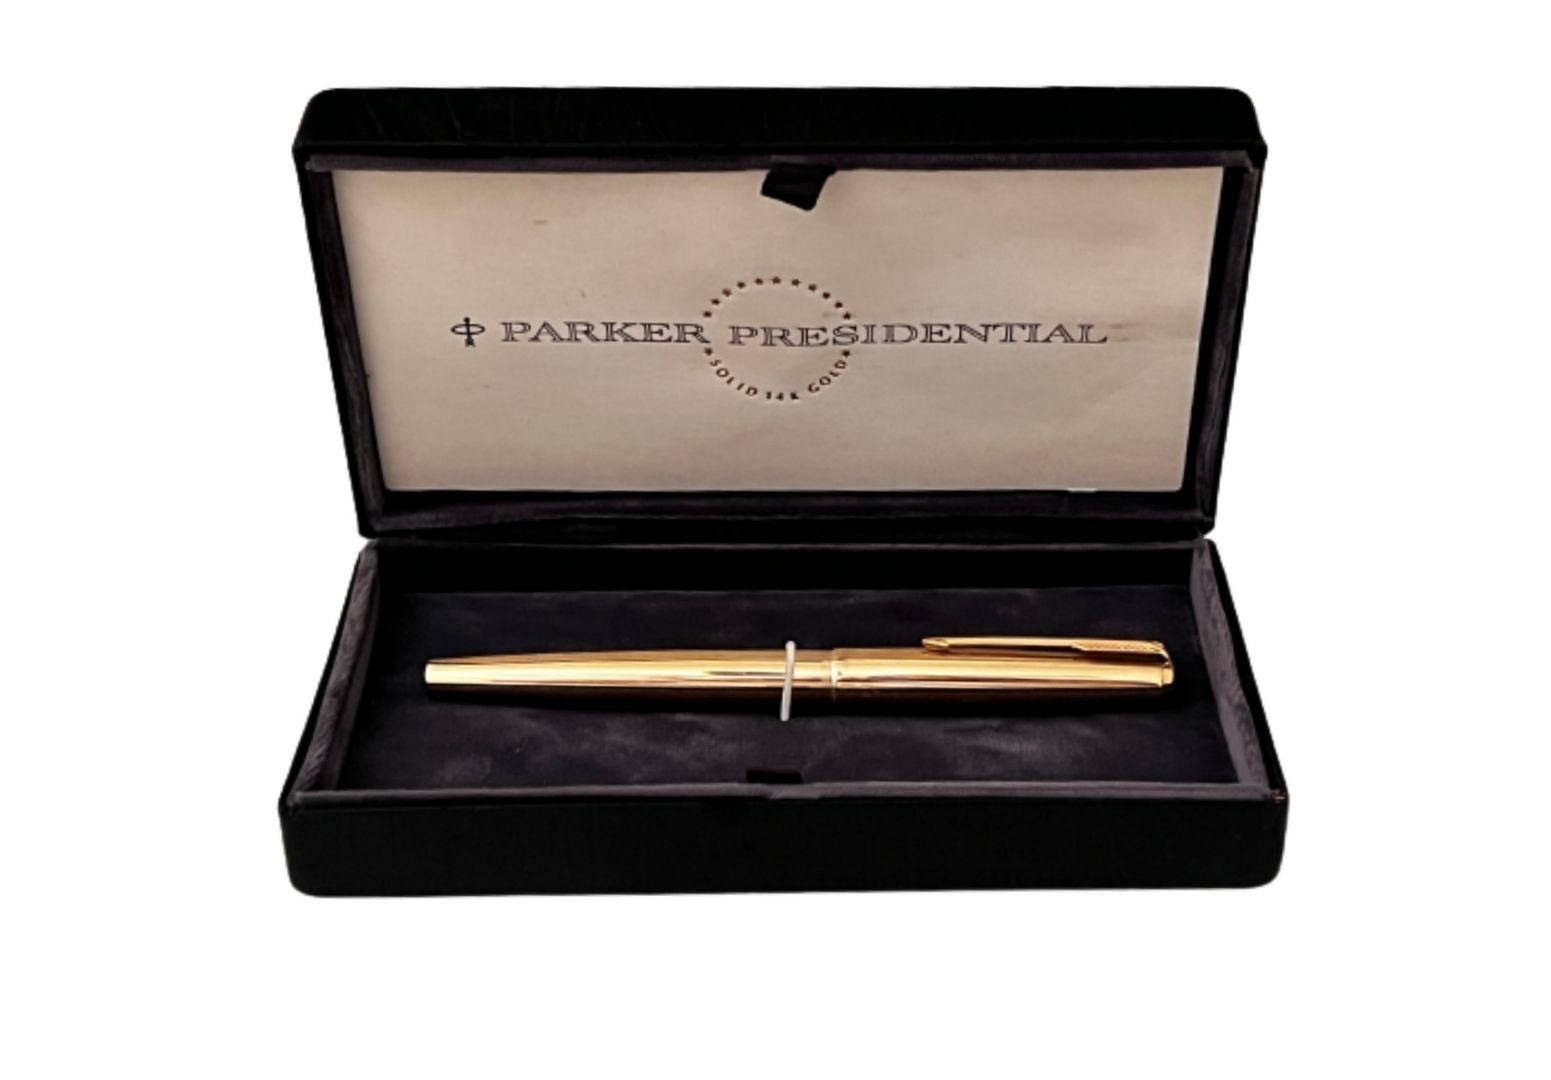 Parker_Presidential_14_k_Gold_fpWaterman_gold_r_stones_1920_safetyIMG_8540-removebg-preview